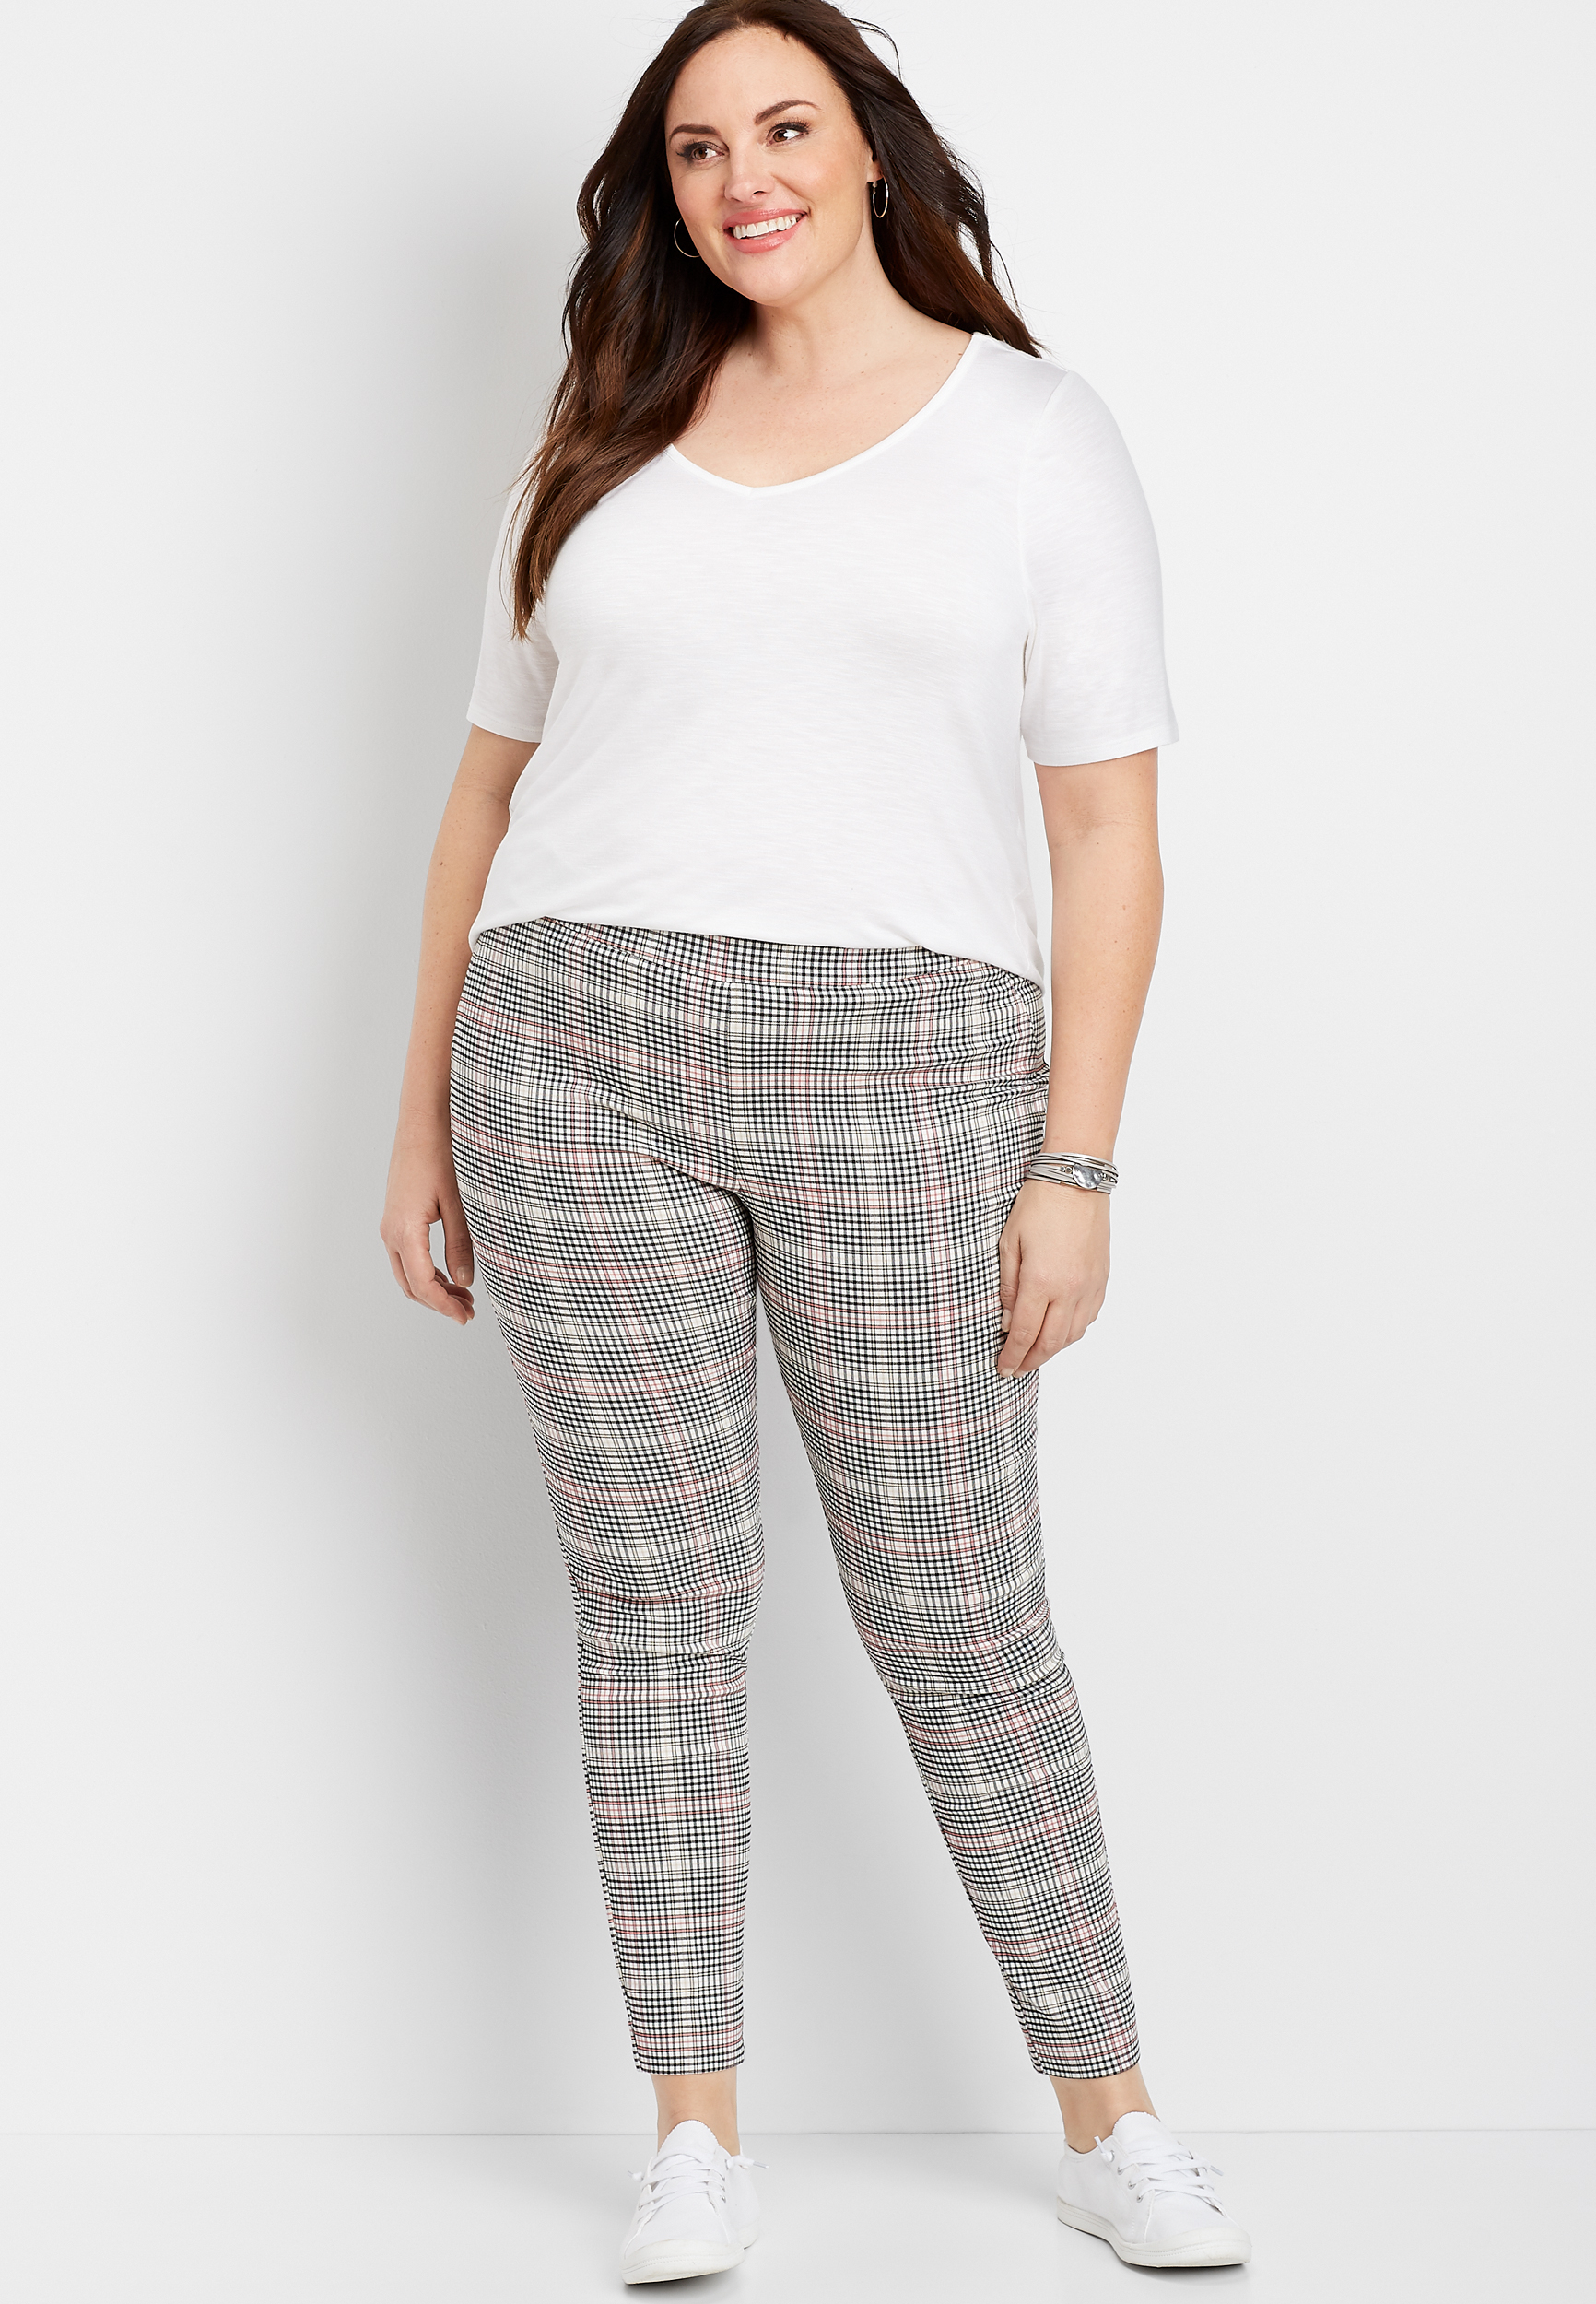 Gap Slim Ankle Pants 19 Pants You Need If You Just Can't Wear